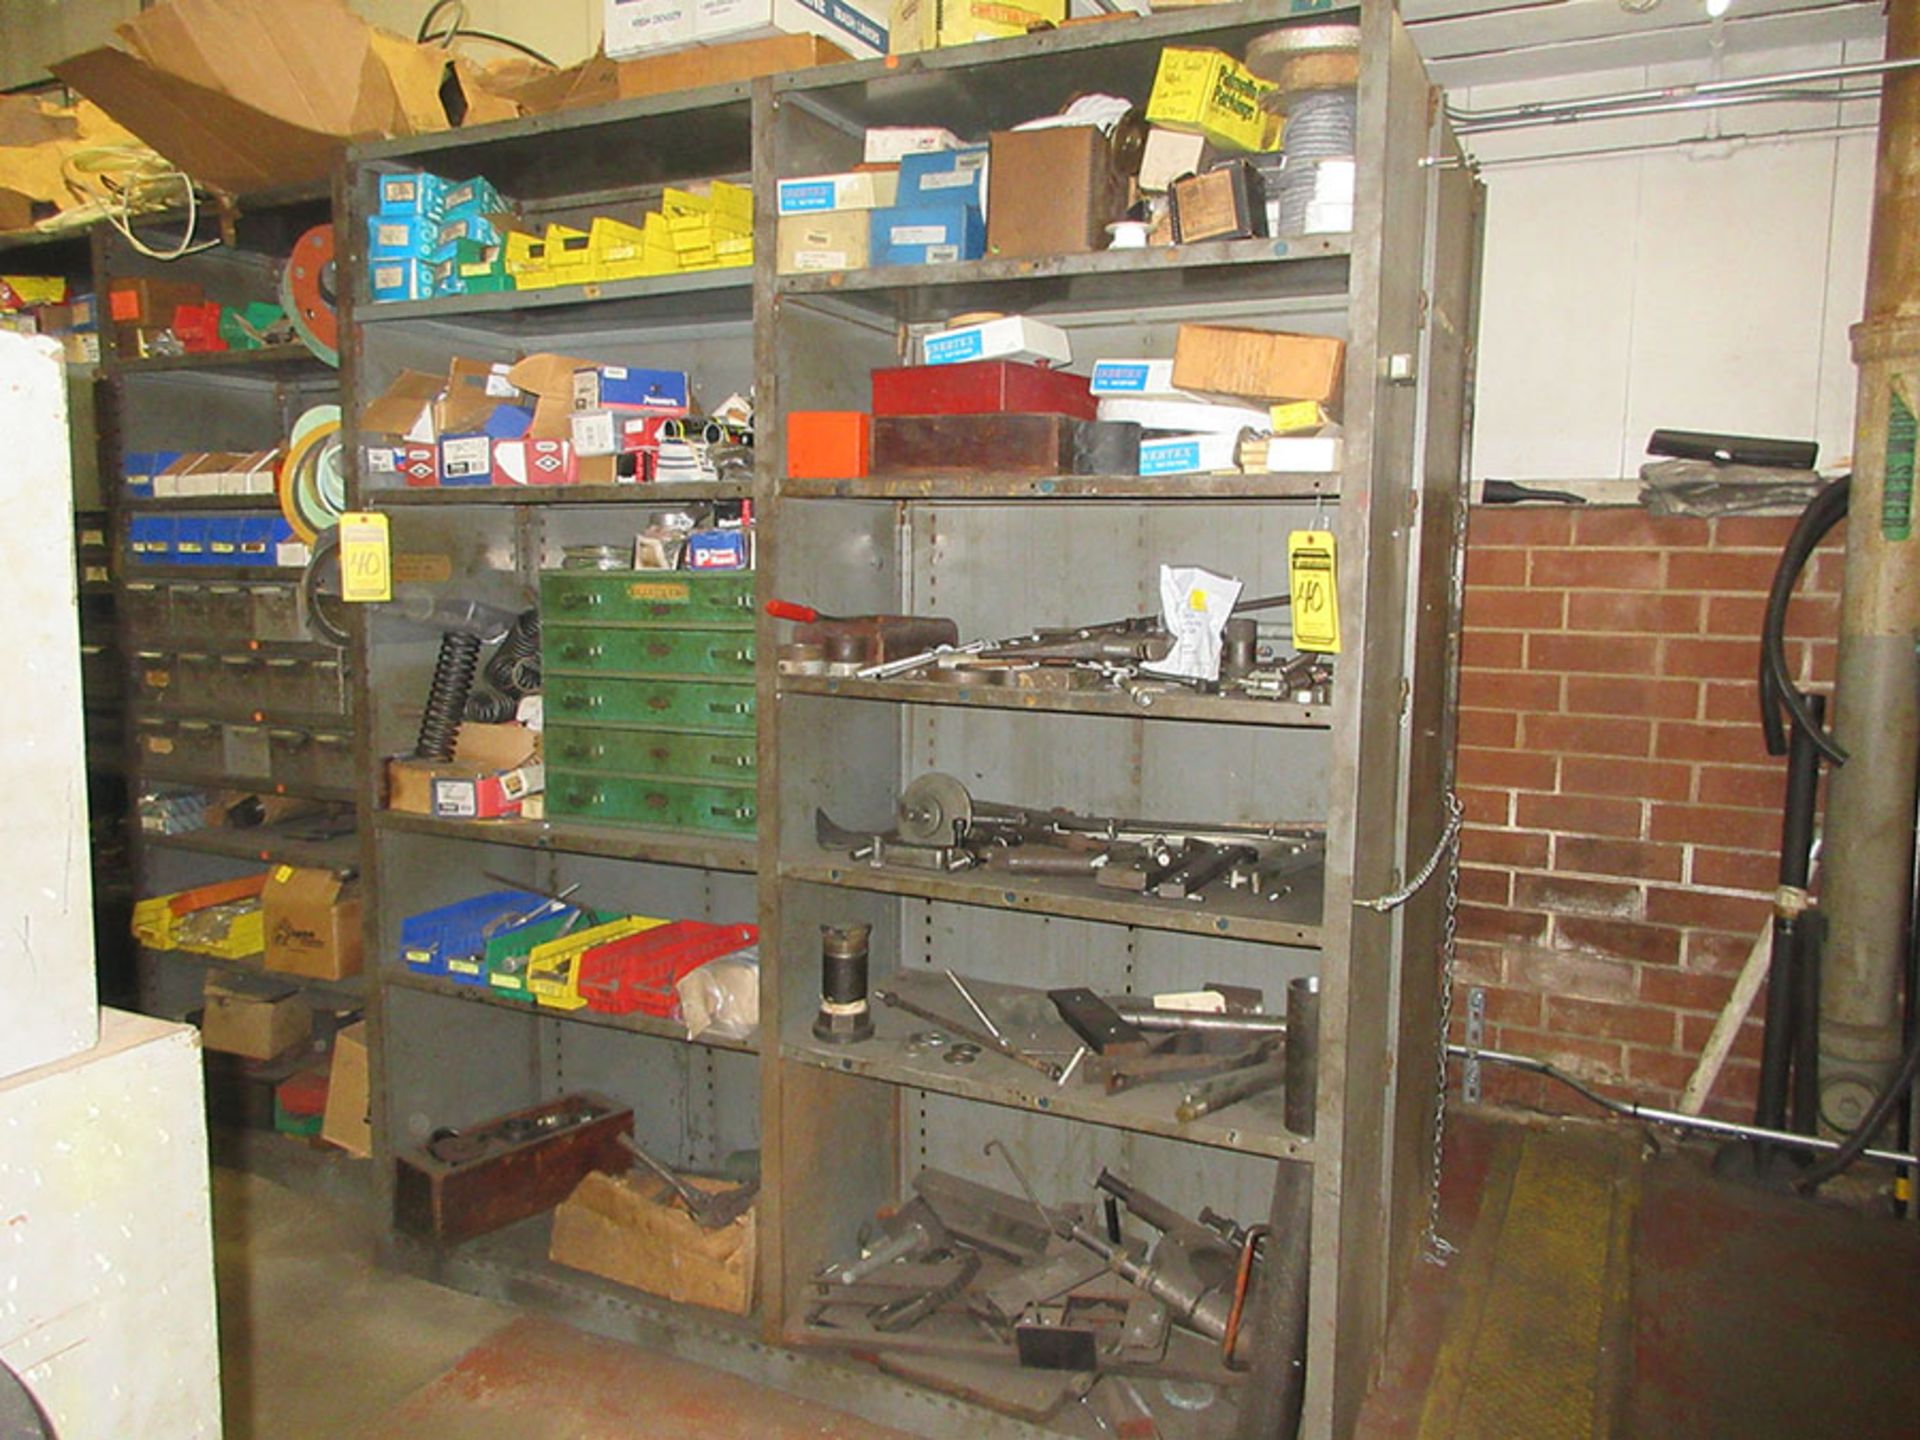 2-SECTION SHELF UNIT WITH CONTENT; SPRINGS, SCREWS, AND VALVE PACKING